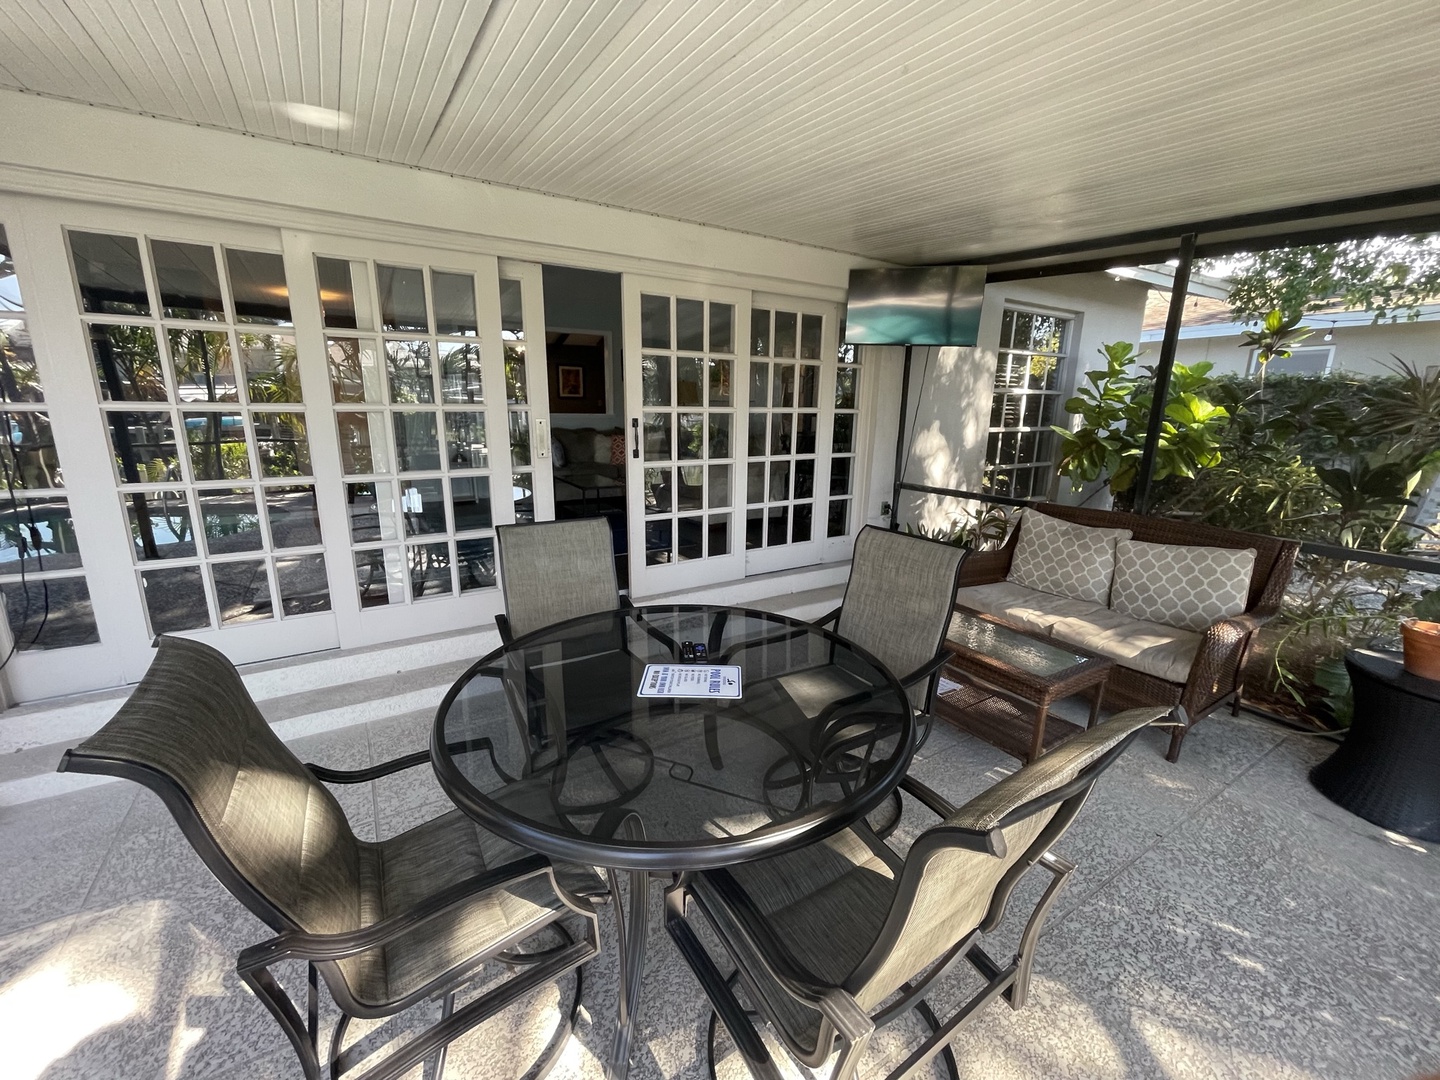 Lounge the day away or dine alfresco on the shaded back patio